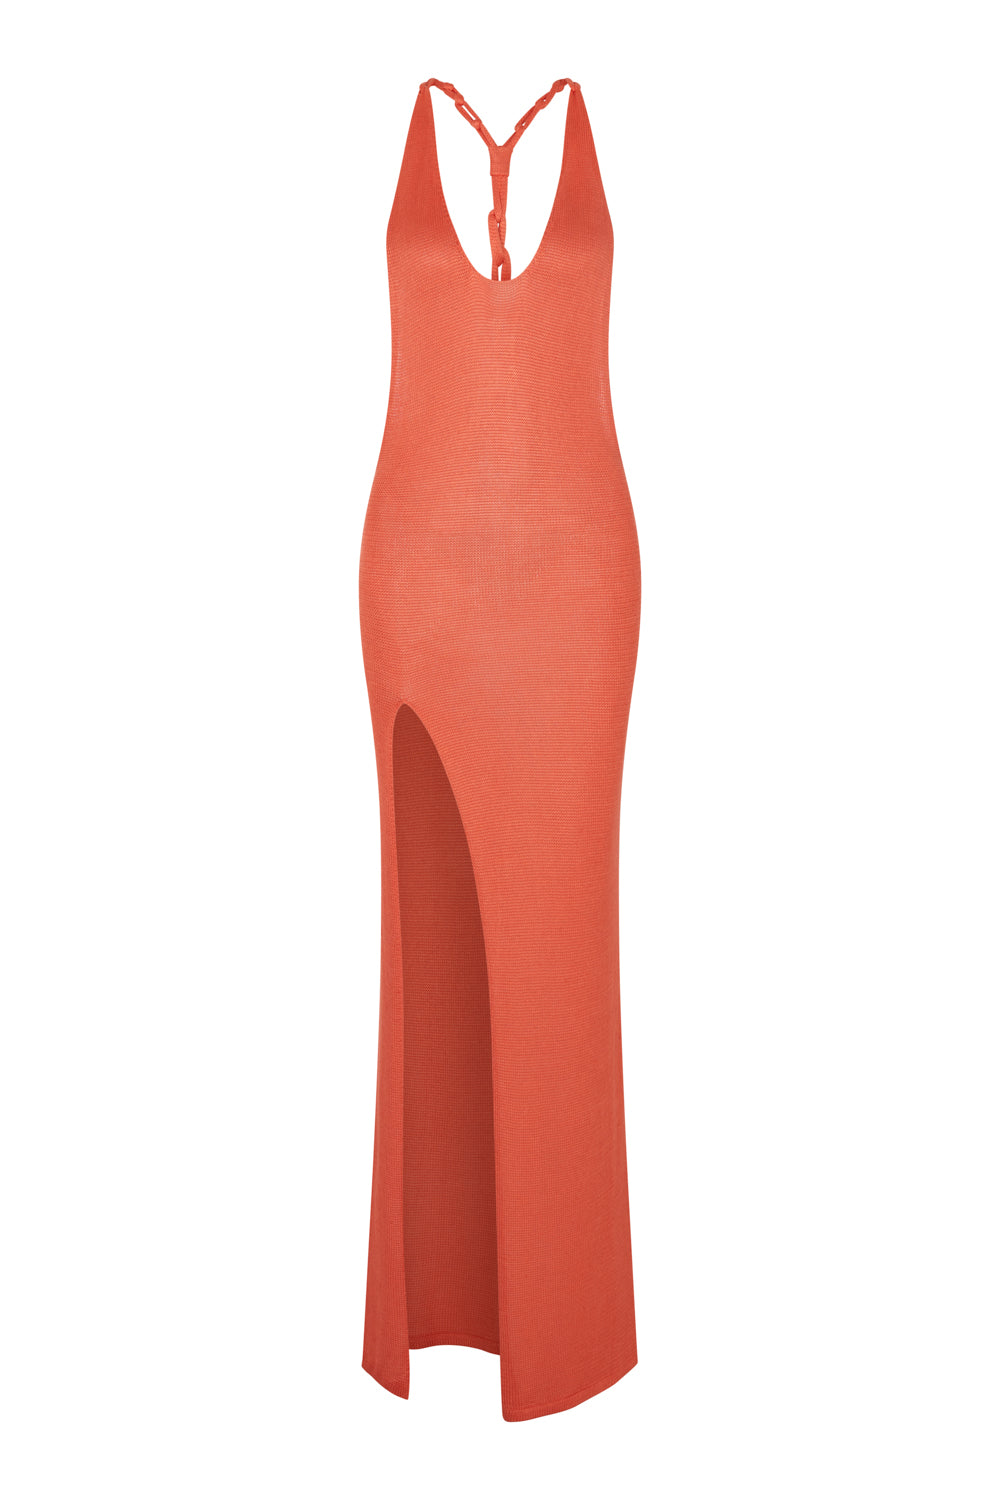 flook the label larisa maxi dress coral knit product image front